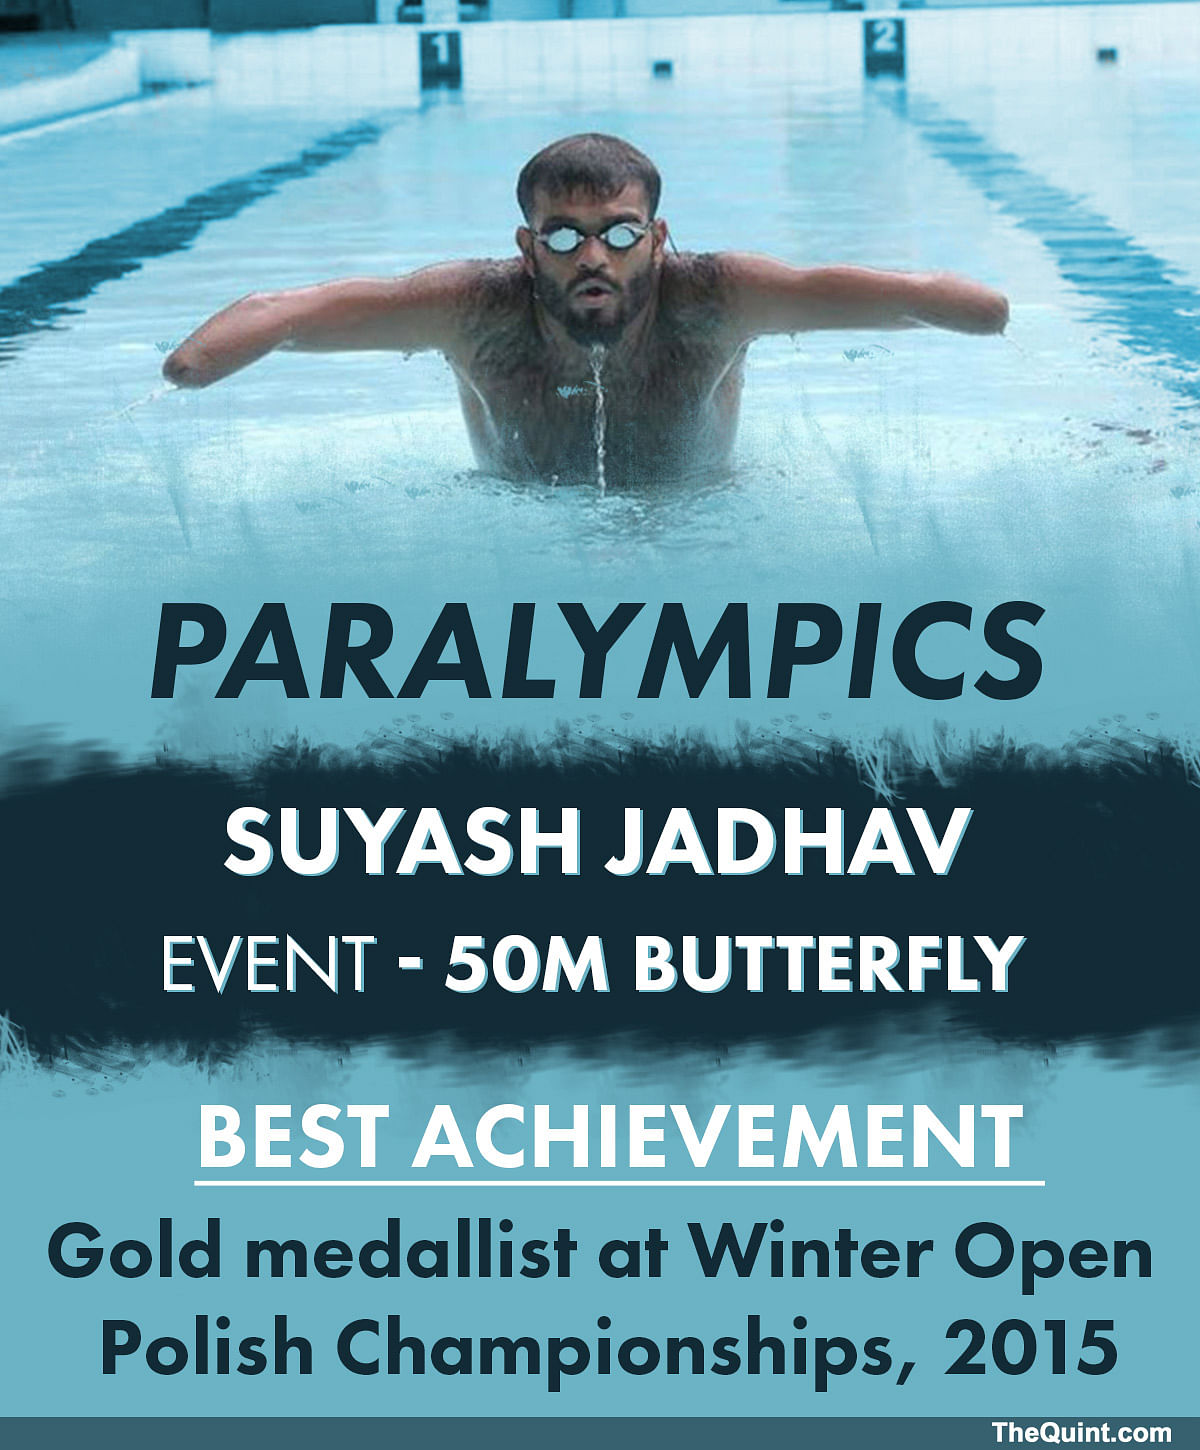 The Quint takes a look at the medal hopes for the Summer Paralympics, which begins on 7 September.